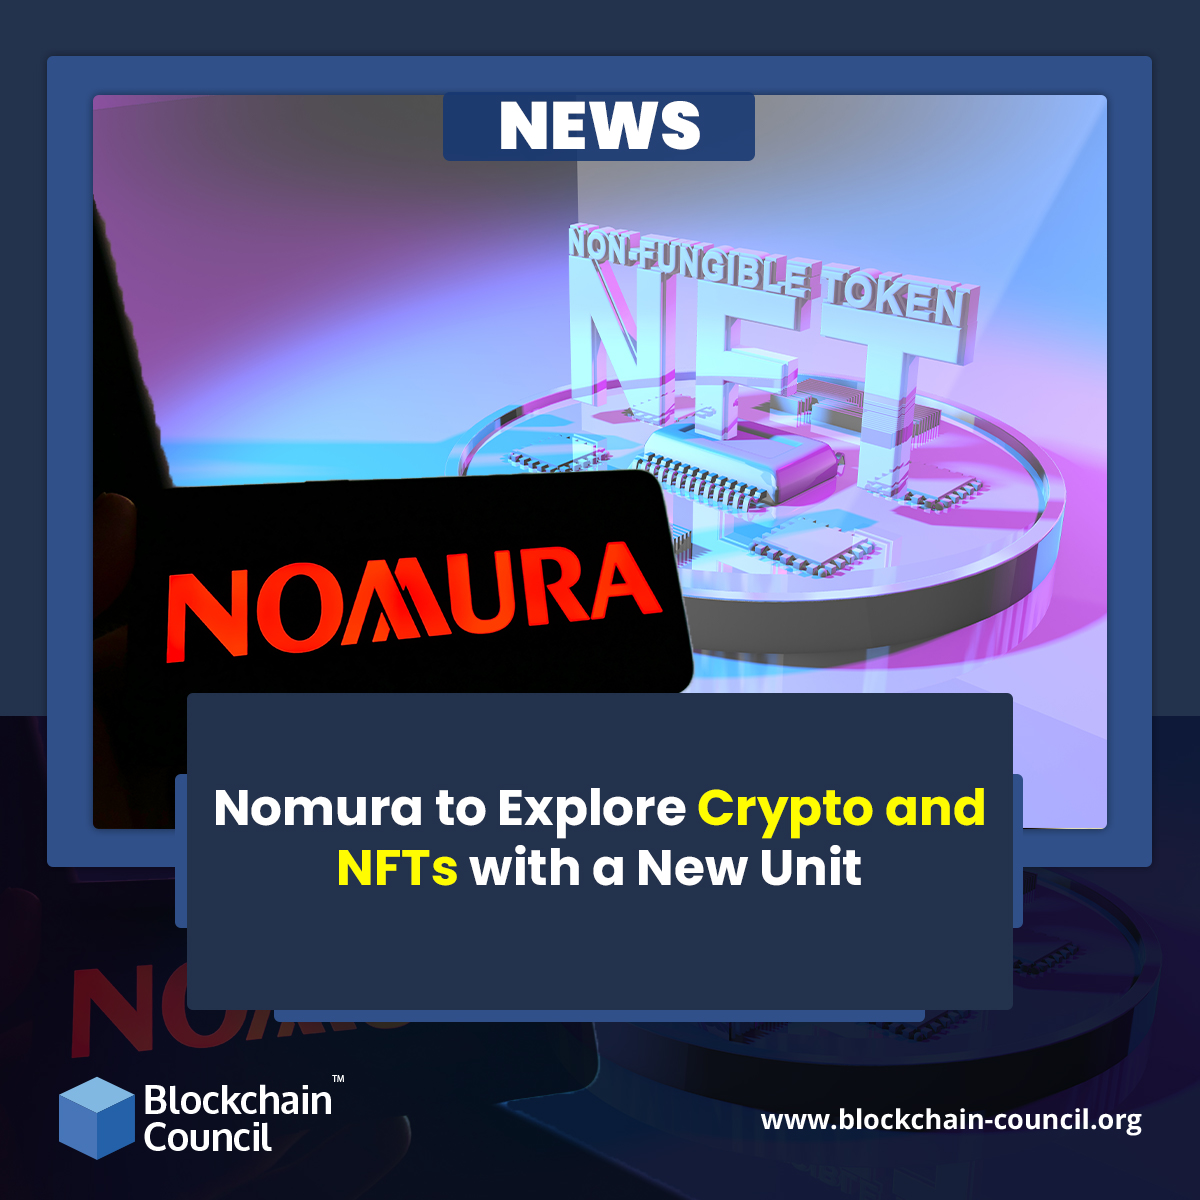 Nomura to Explore Crypto and NFTs with a New Unit